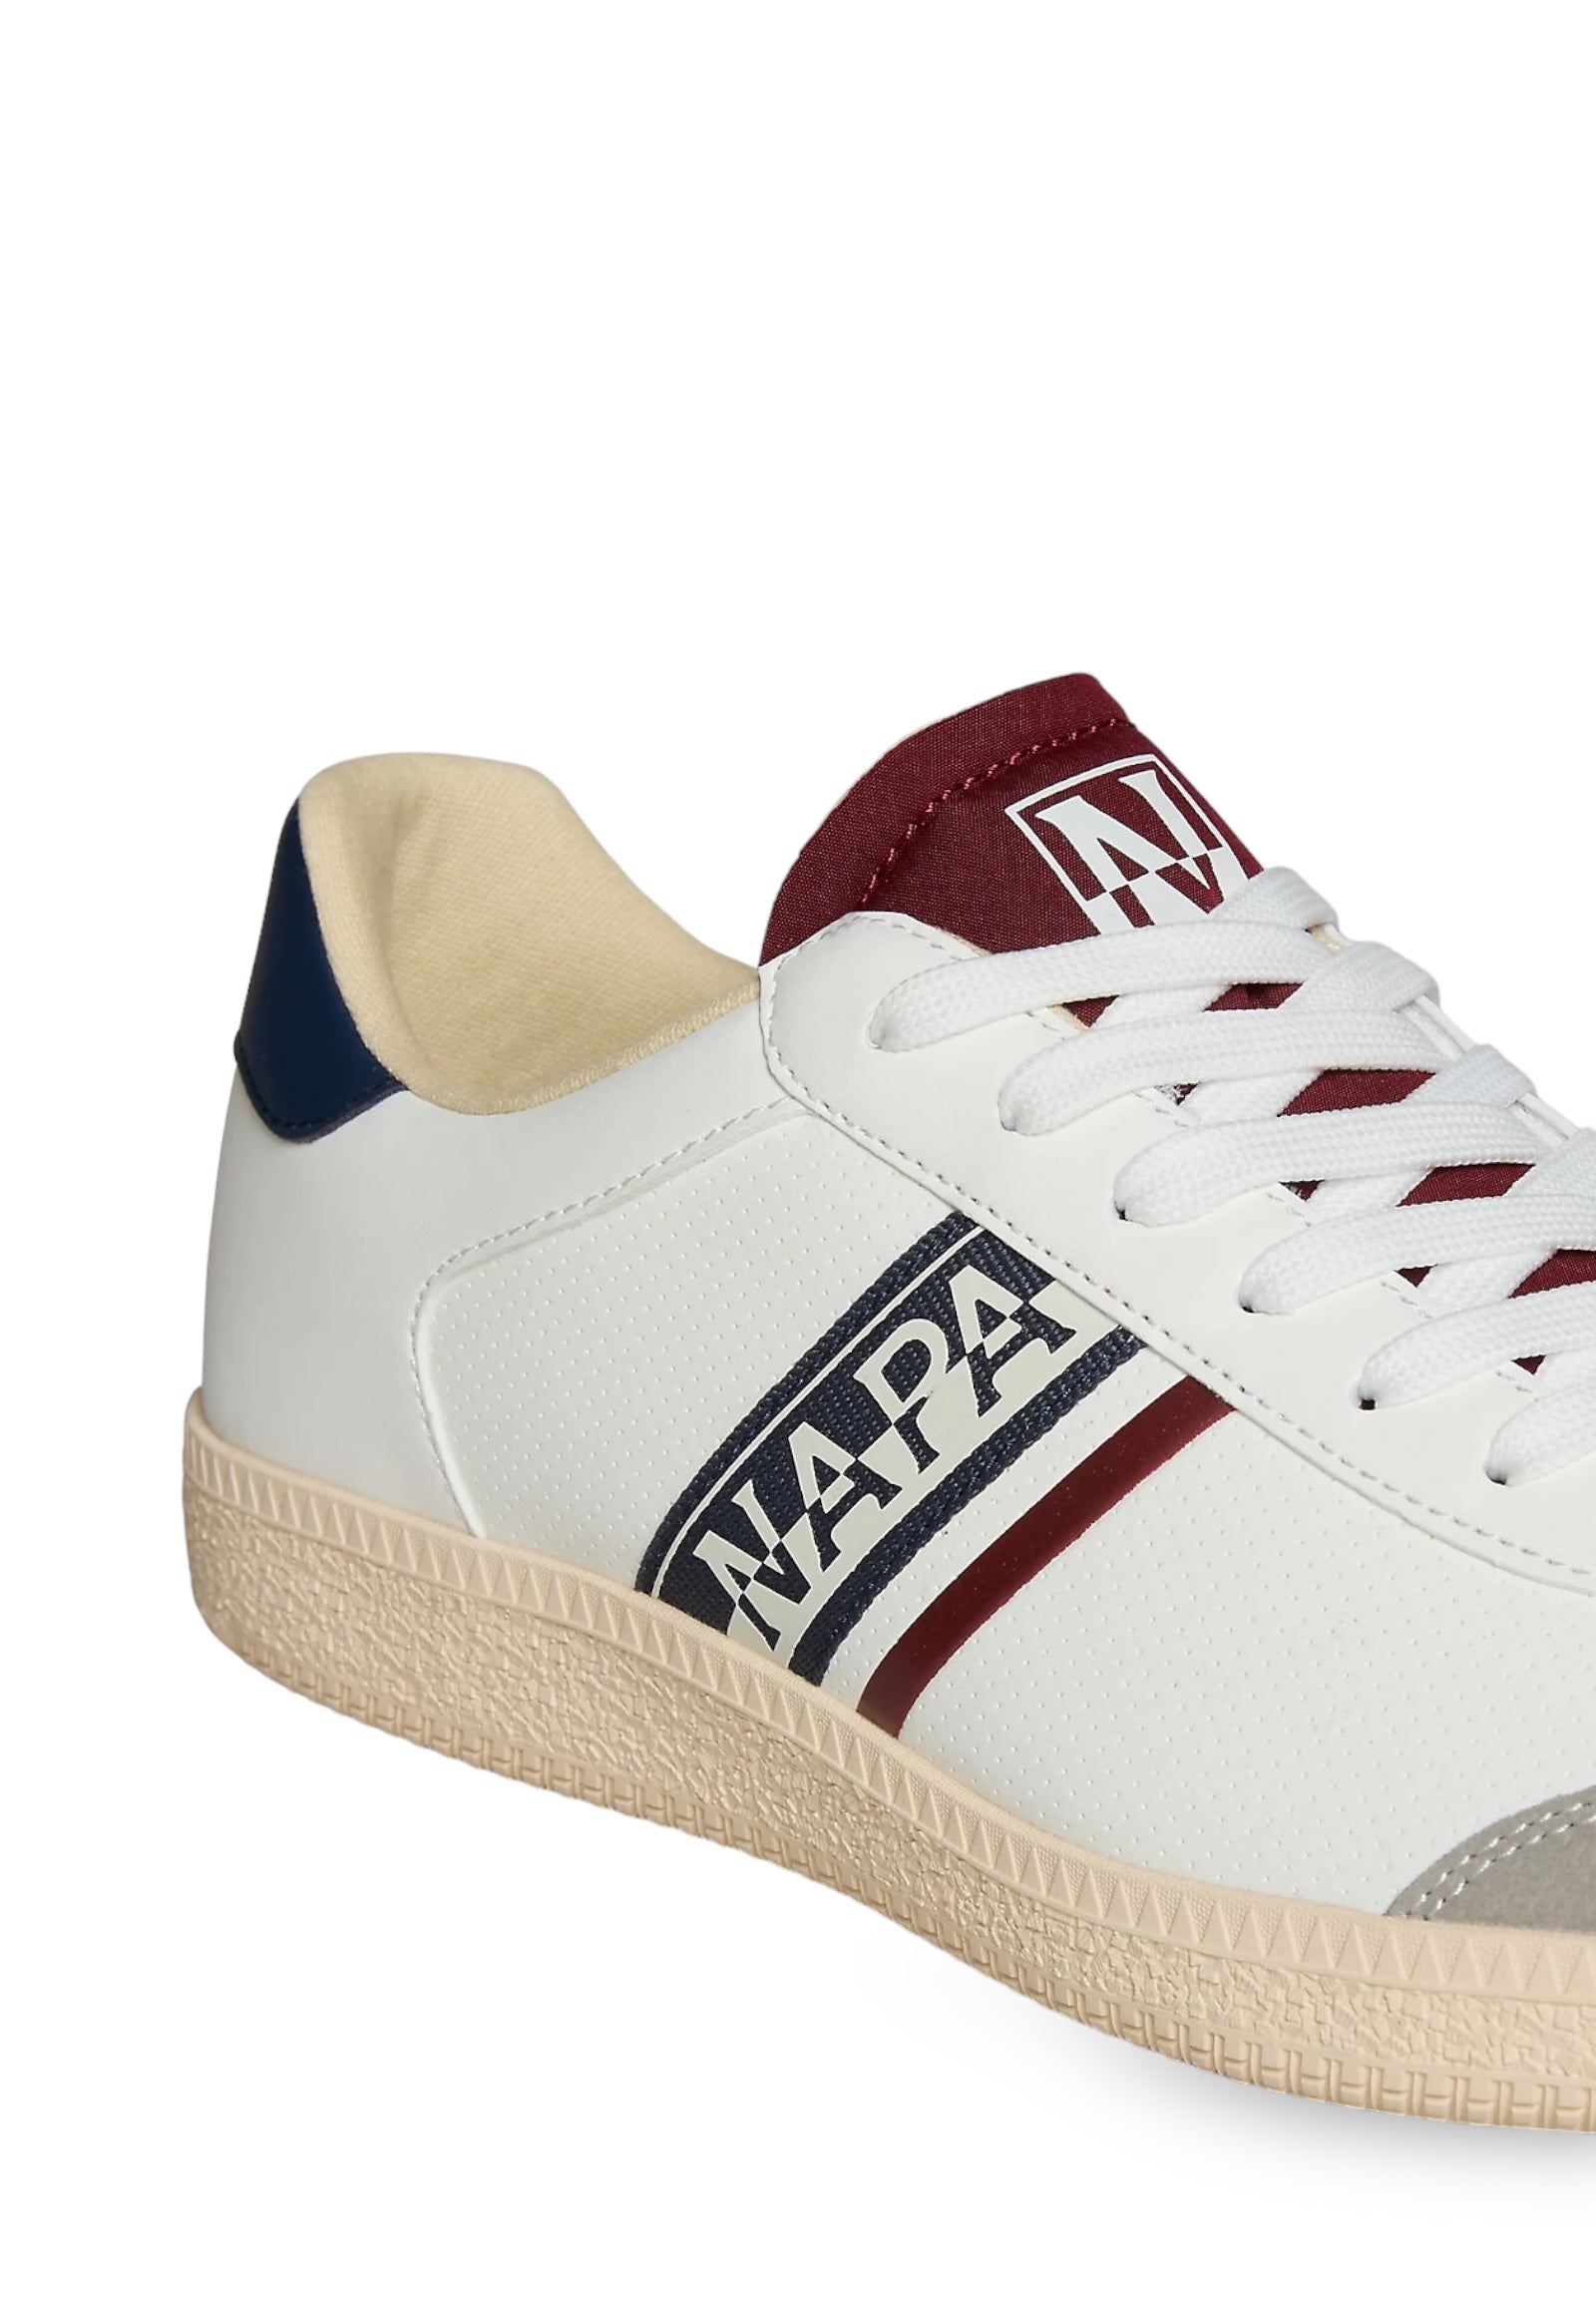 Sneakers Np0a4i7m WhitE-NavY-Red